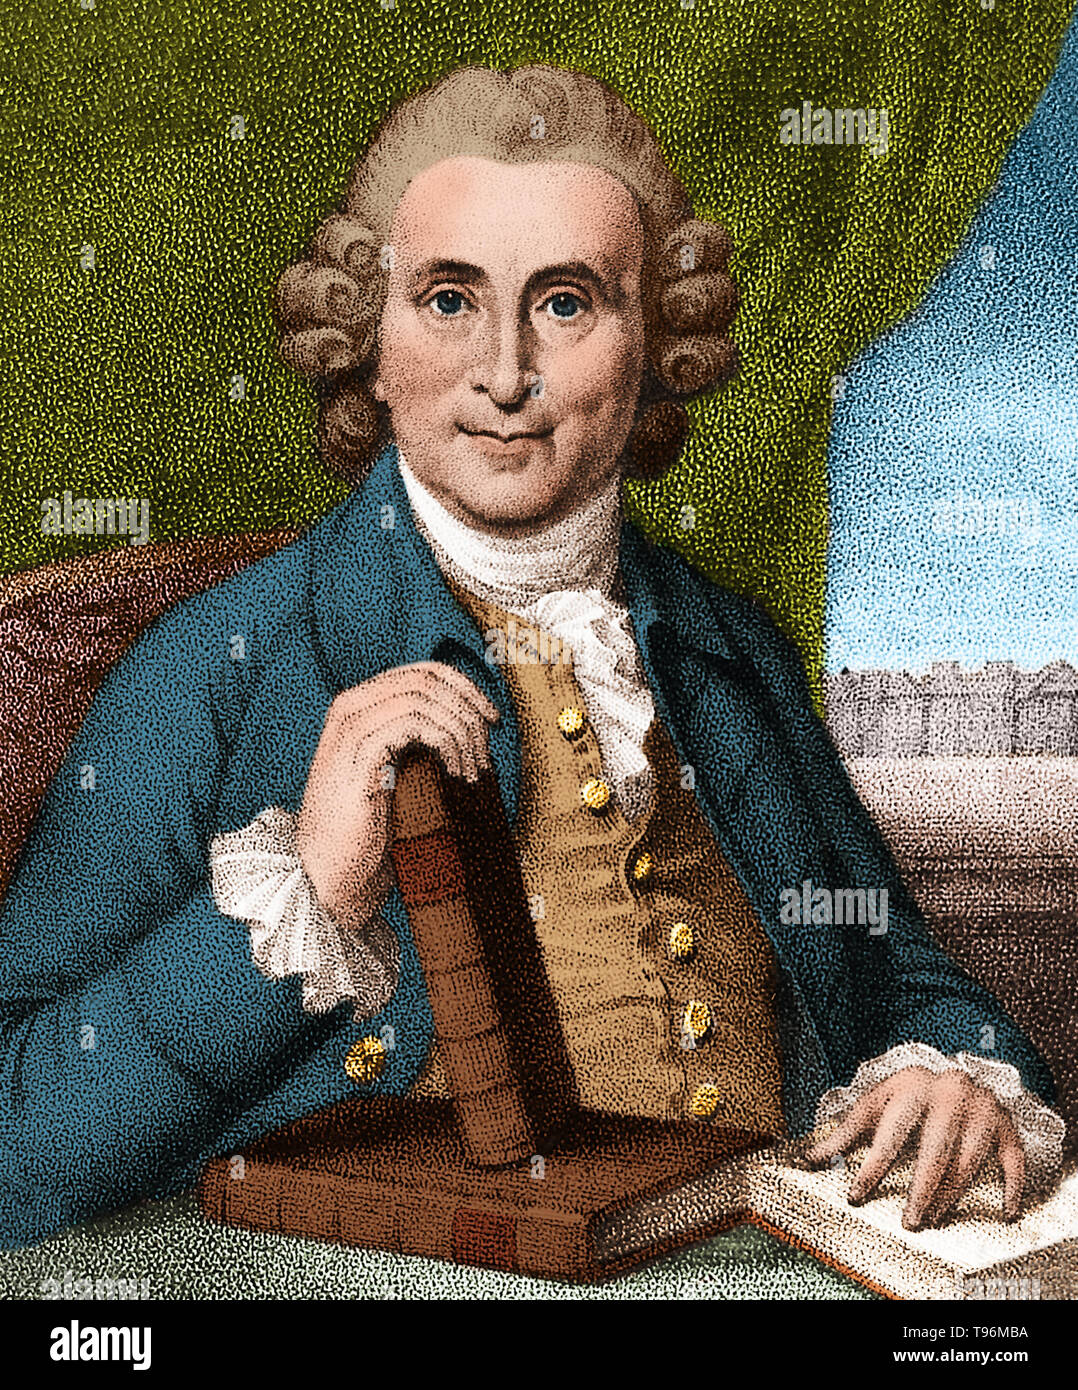 James Lind (1716-1794), Scottish physician who developed the theory that citrus fruits could cure scurvy. He argued for the health benefits of better ventilation aboard naval ships, the improved cleanliness of sailors' bodies, clothing and bedding, and below-deck fumigation with sulphur and arsenic. He also proposed that fresh water could be obtained by distilling sea water. Stipple engraving by J. Wright after Sir G. Chalmers, 1783. Stock Photo